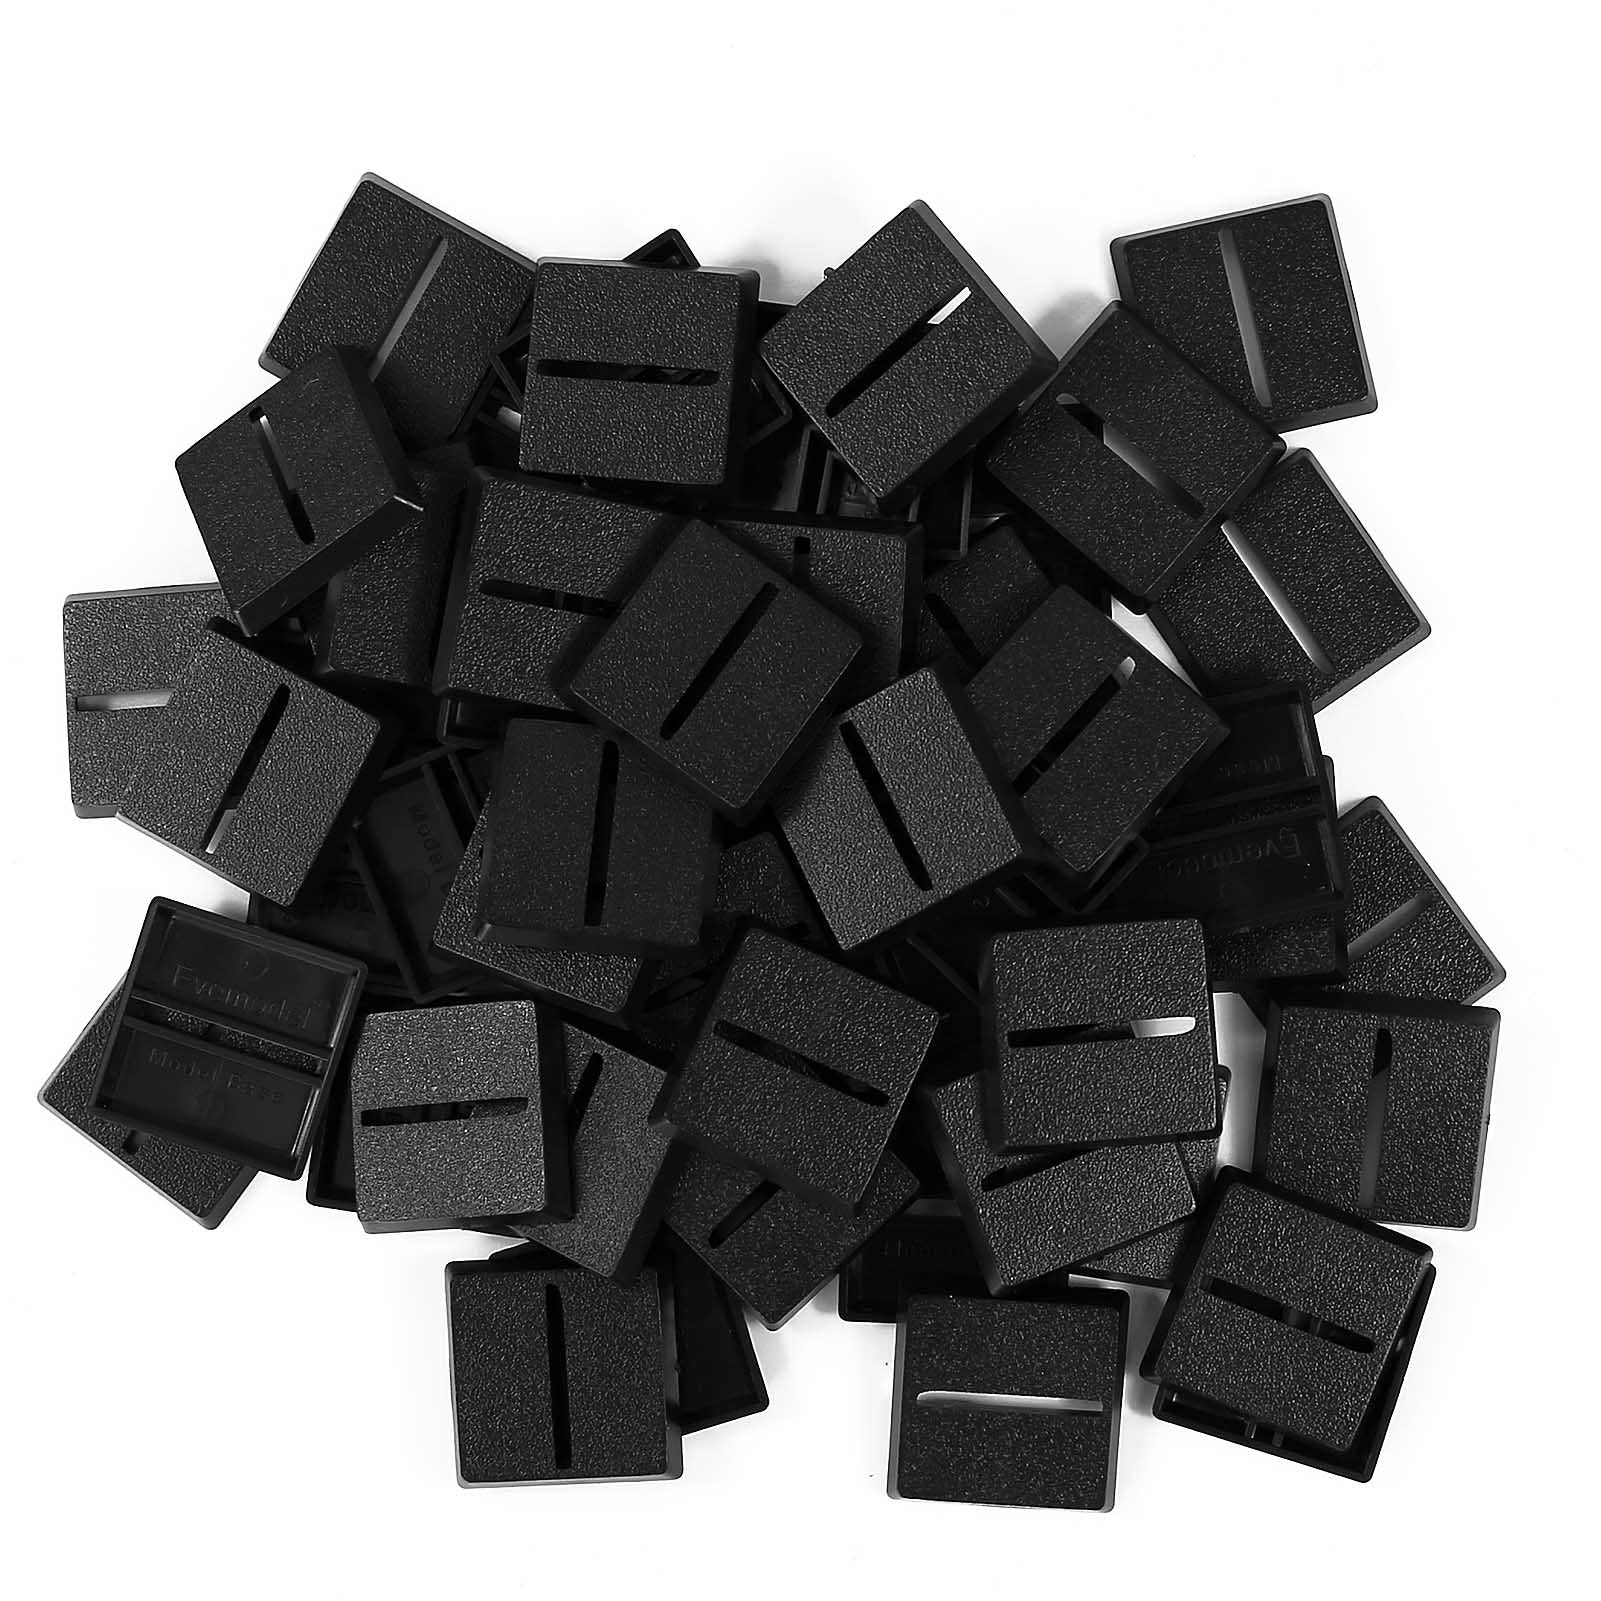 MB2525 20pcs 25mm Square Slot Bases for Table Game Wargames